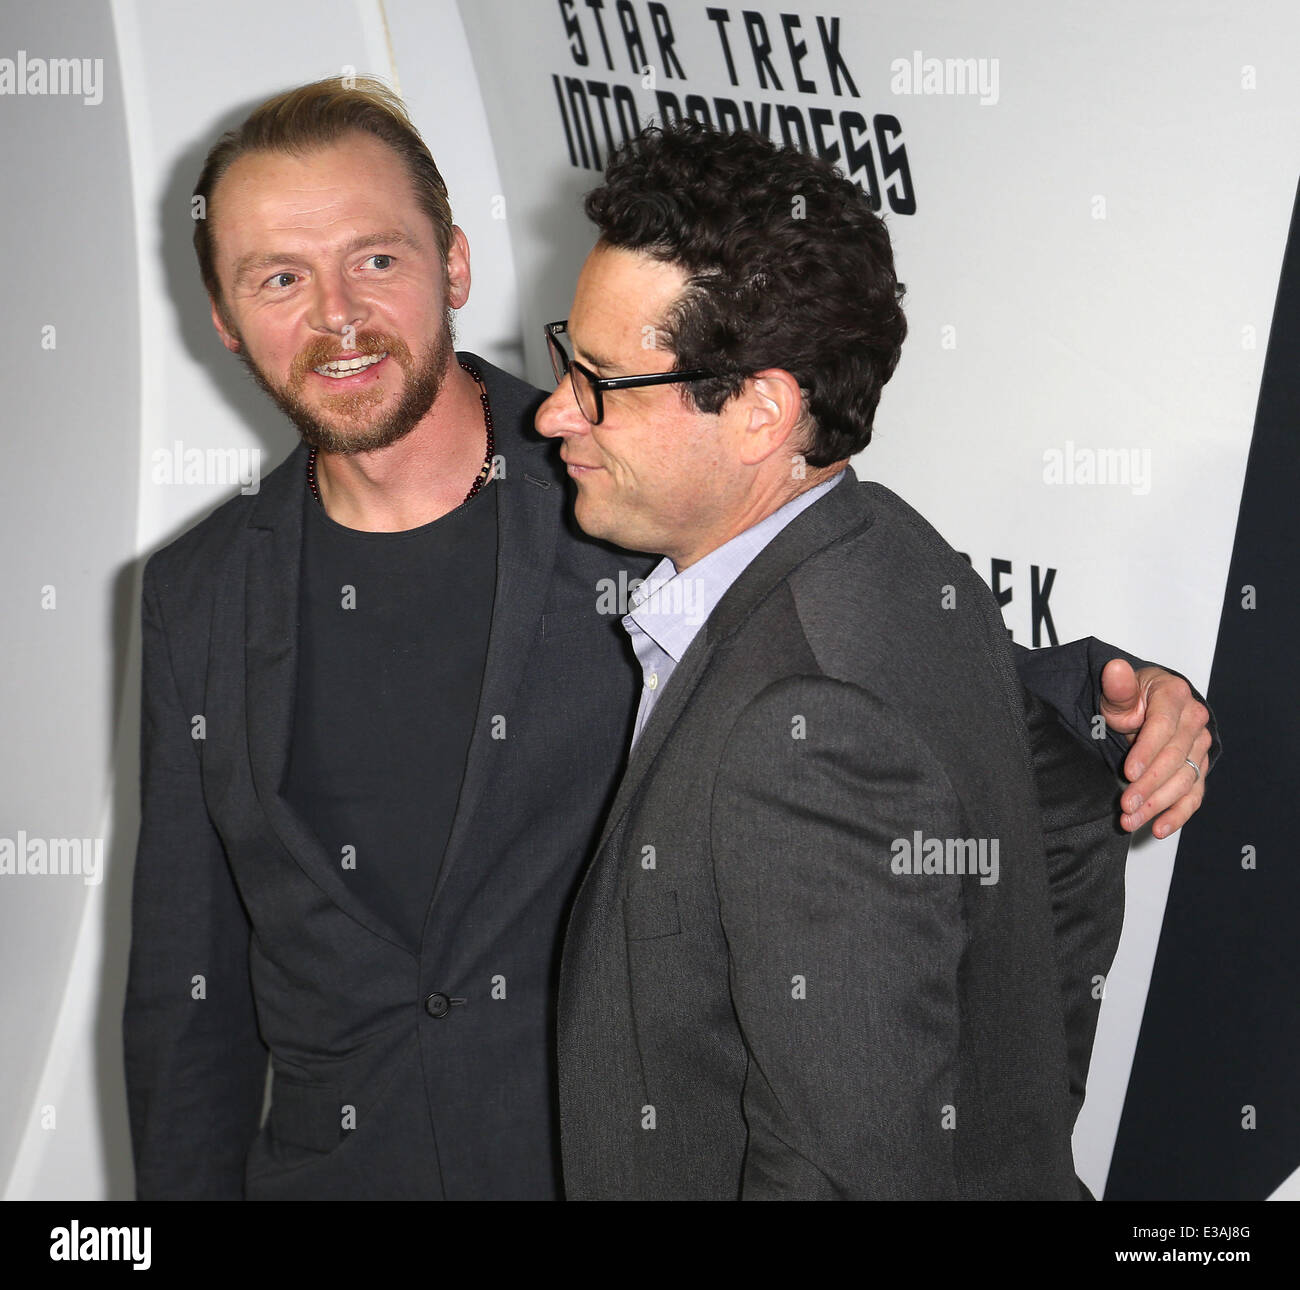 'Star Trek: Into Darkness' Blu-ray and DVD debut at California Science Center  Featuring: Simon Pegg,J.J. Abrams Where: Los Ange Stock Photo